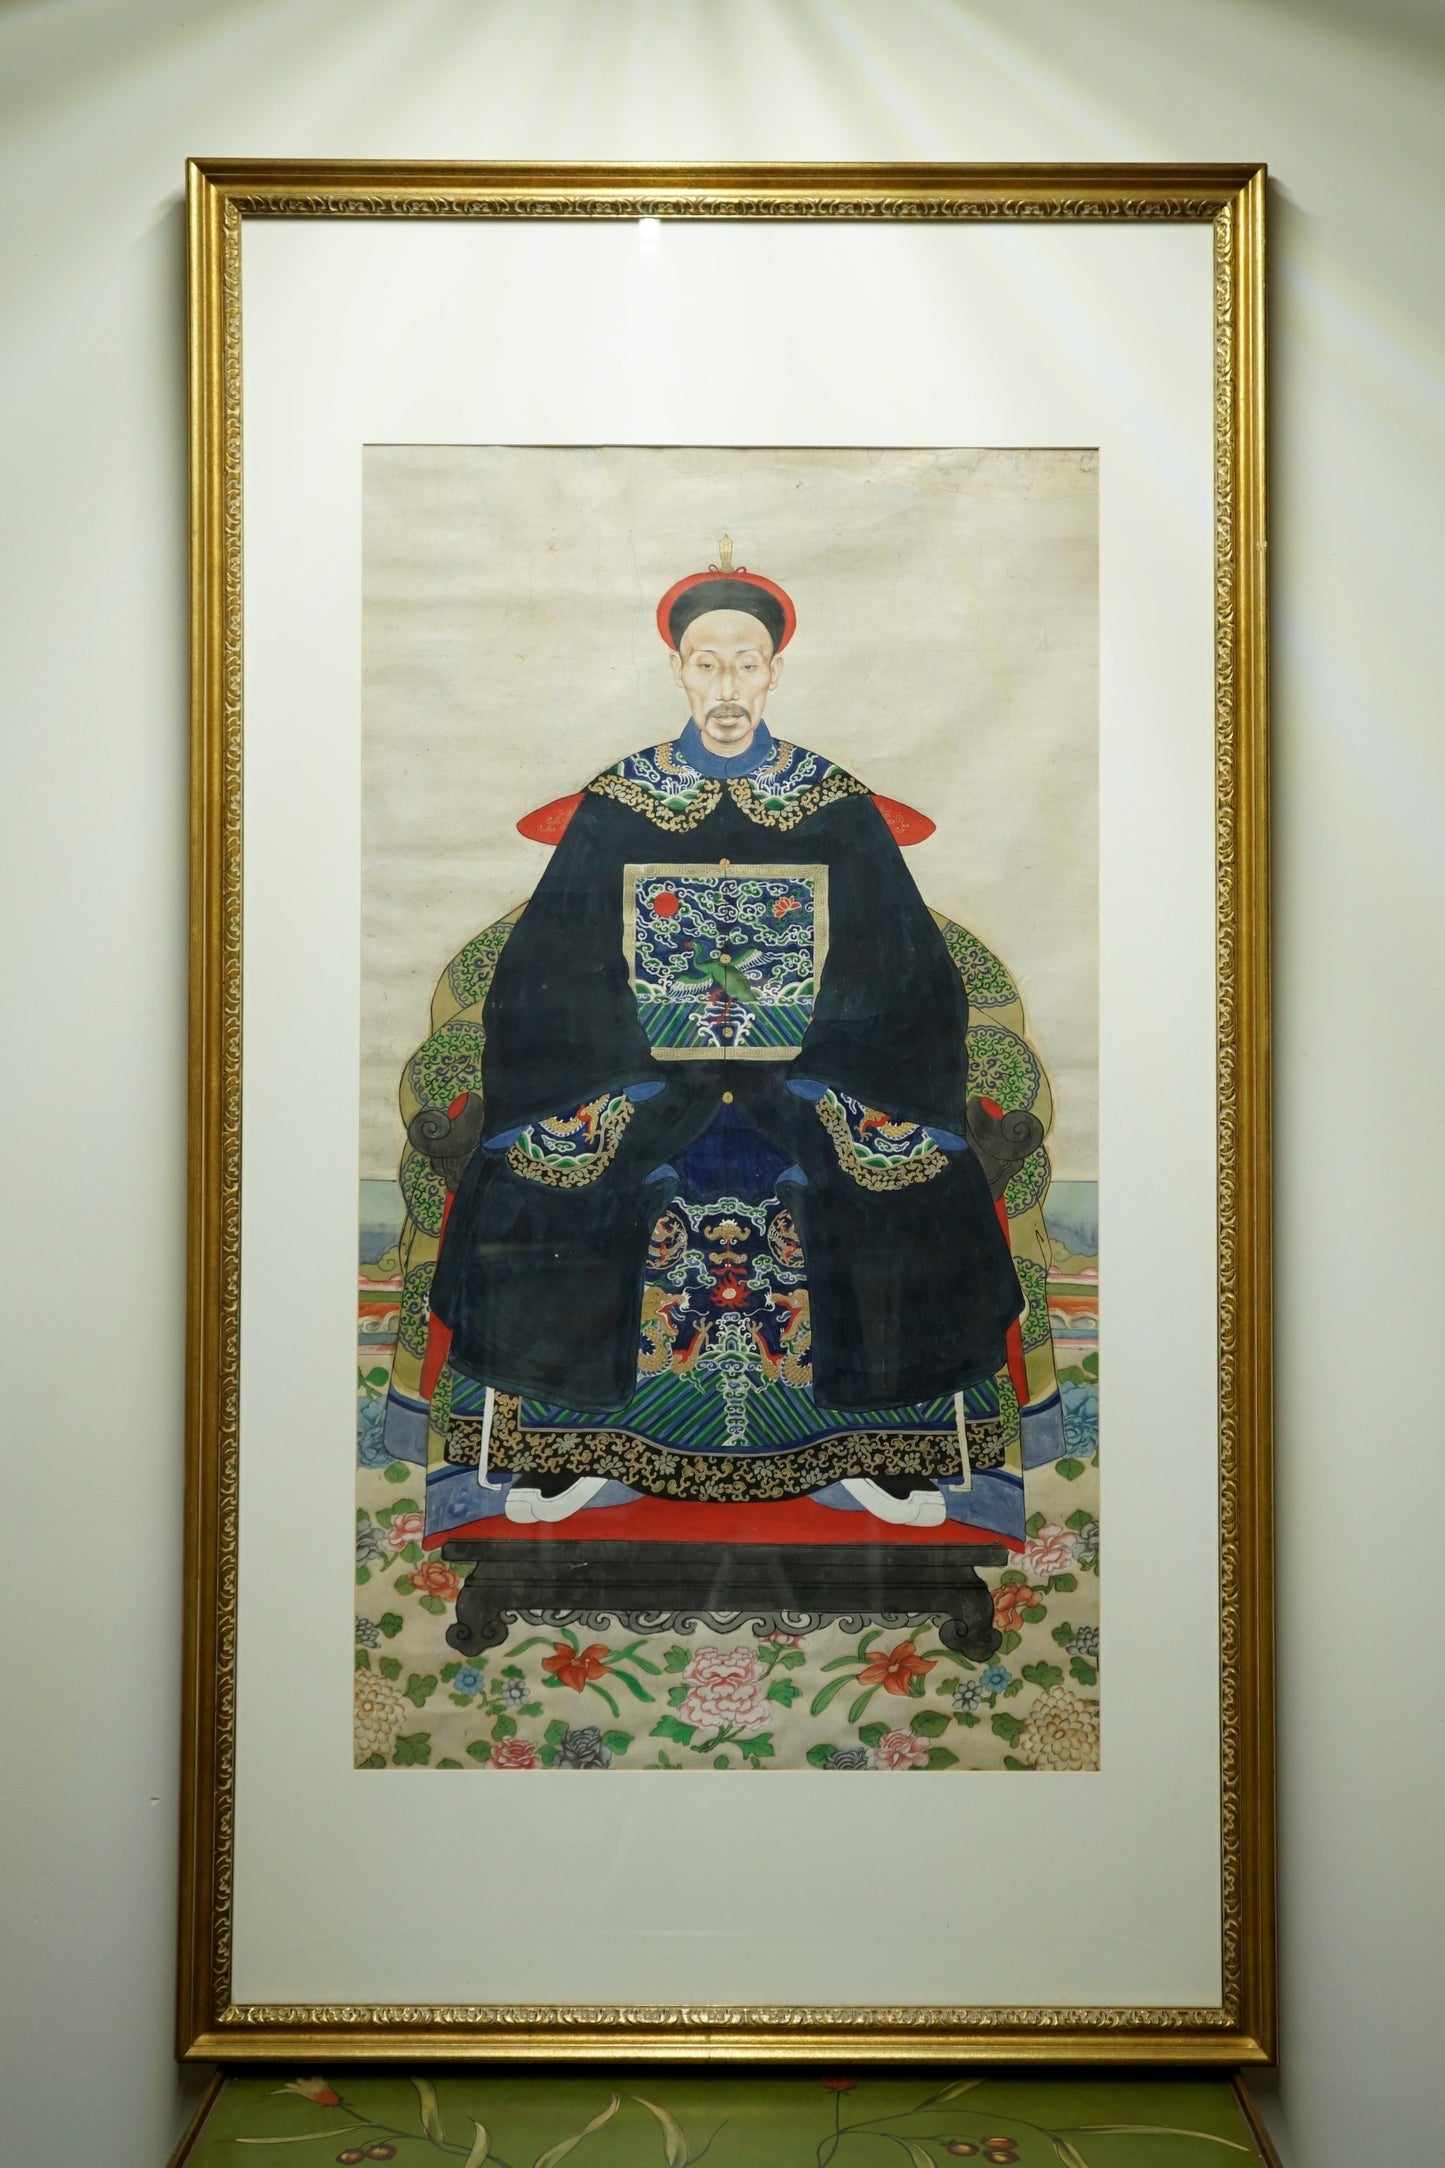 TWO CHINESE ANCESTOR PORTRAITS OF A CIVIL OFFICIAL AND AN OFFICAL'S WIFE